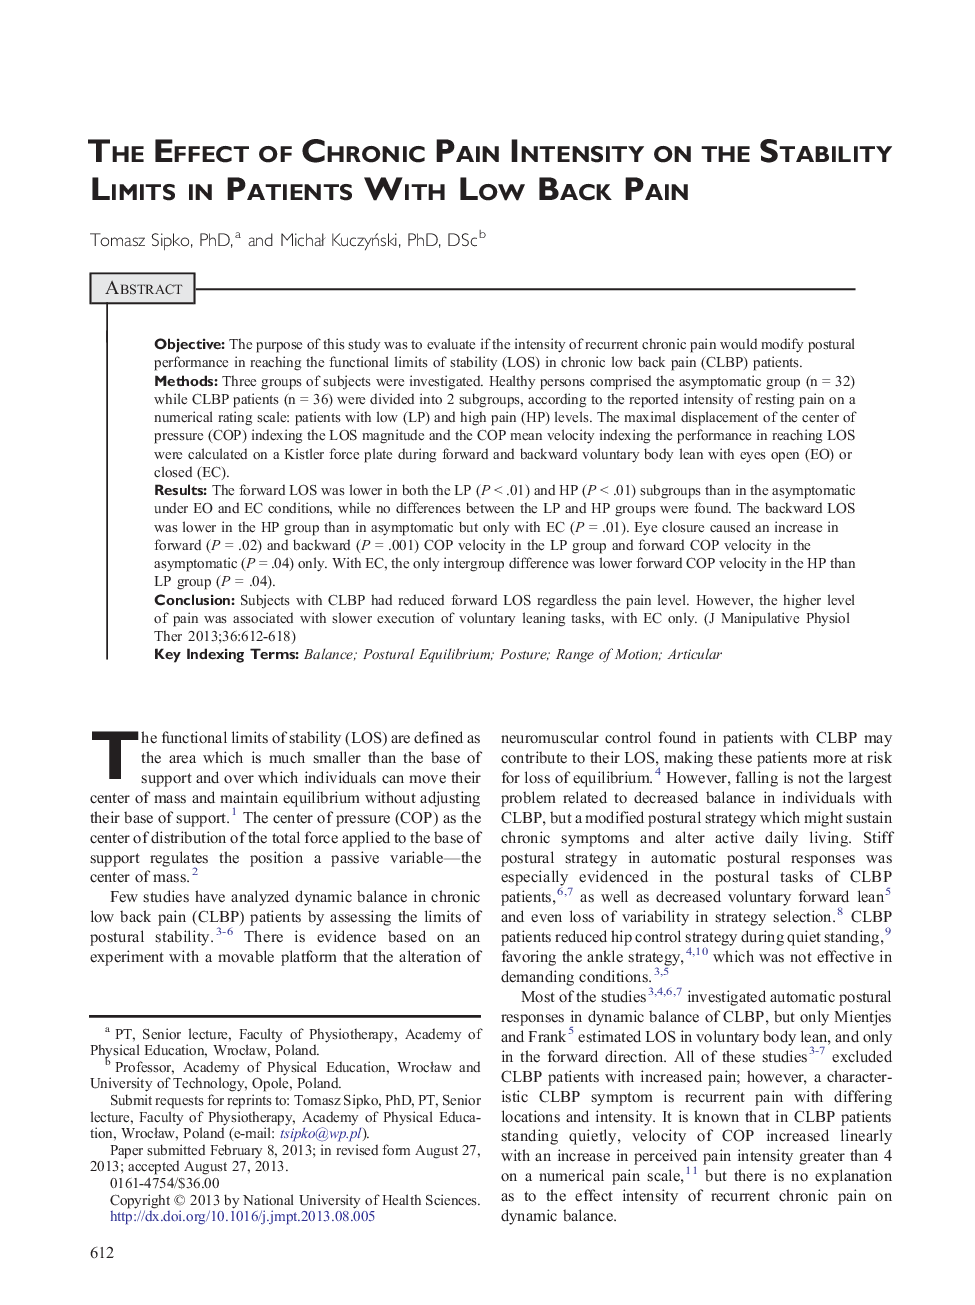 The Effect of Chronic Pain Intensity on the Stability Limits in Patients With Low Back Pain